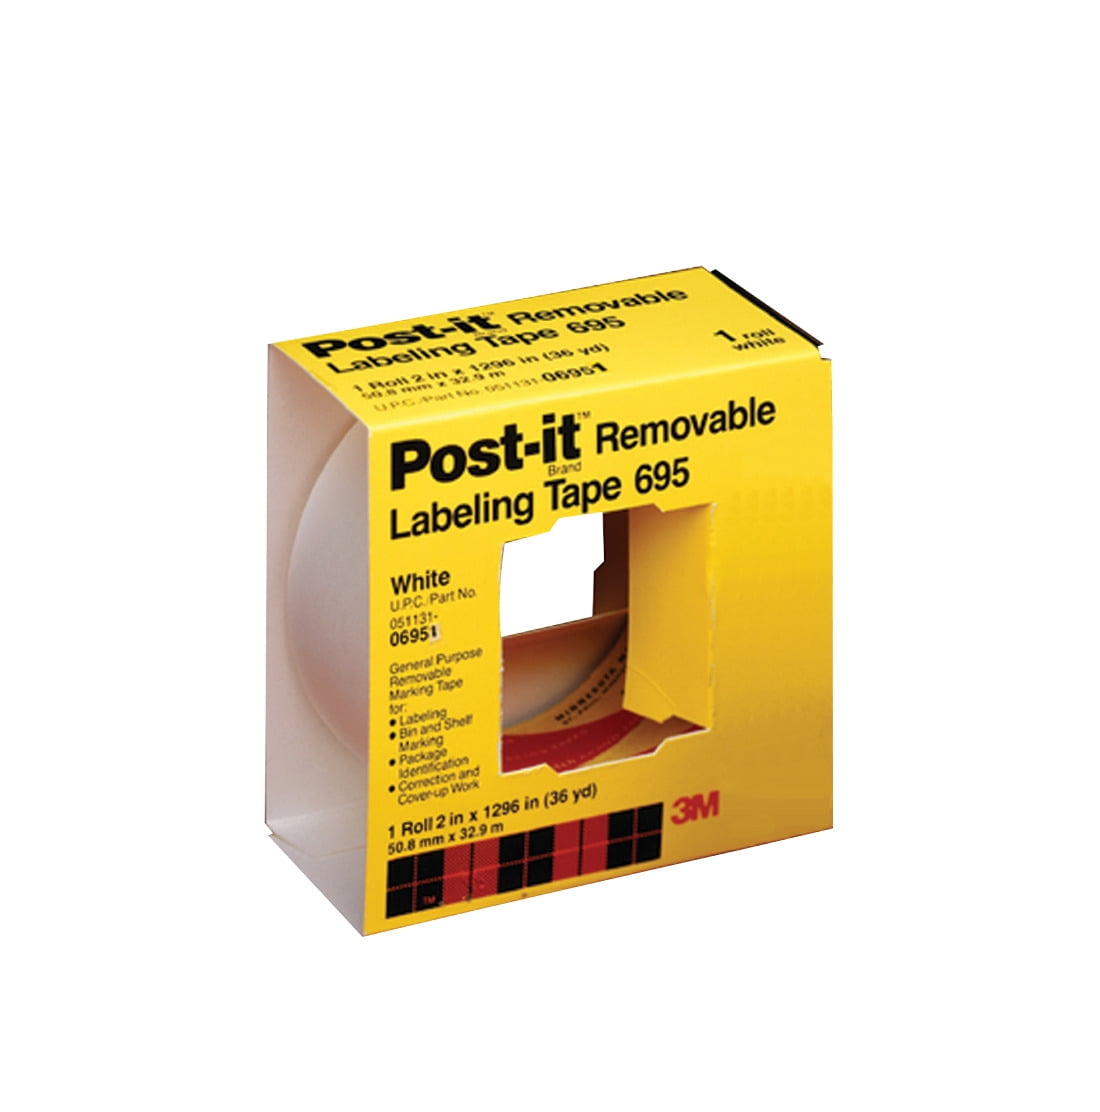 Post-it Removable Labeling Tape, 2 in x 36 yd, White